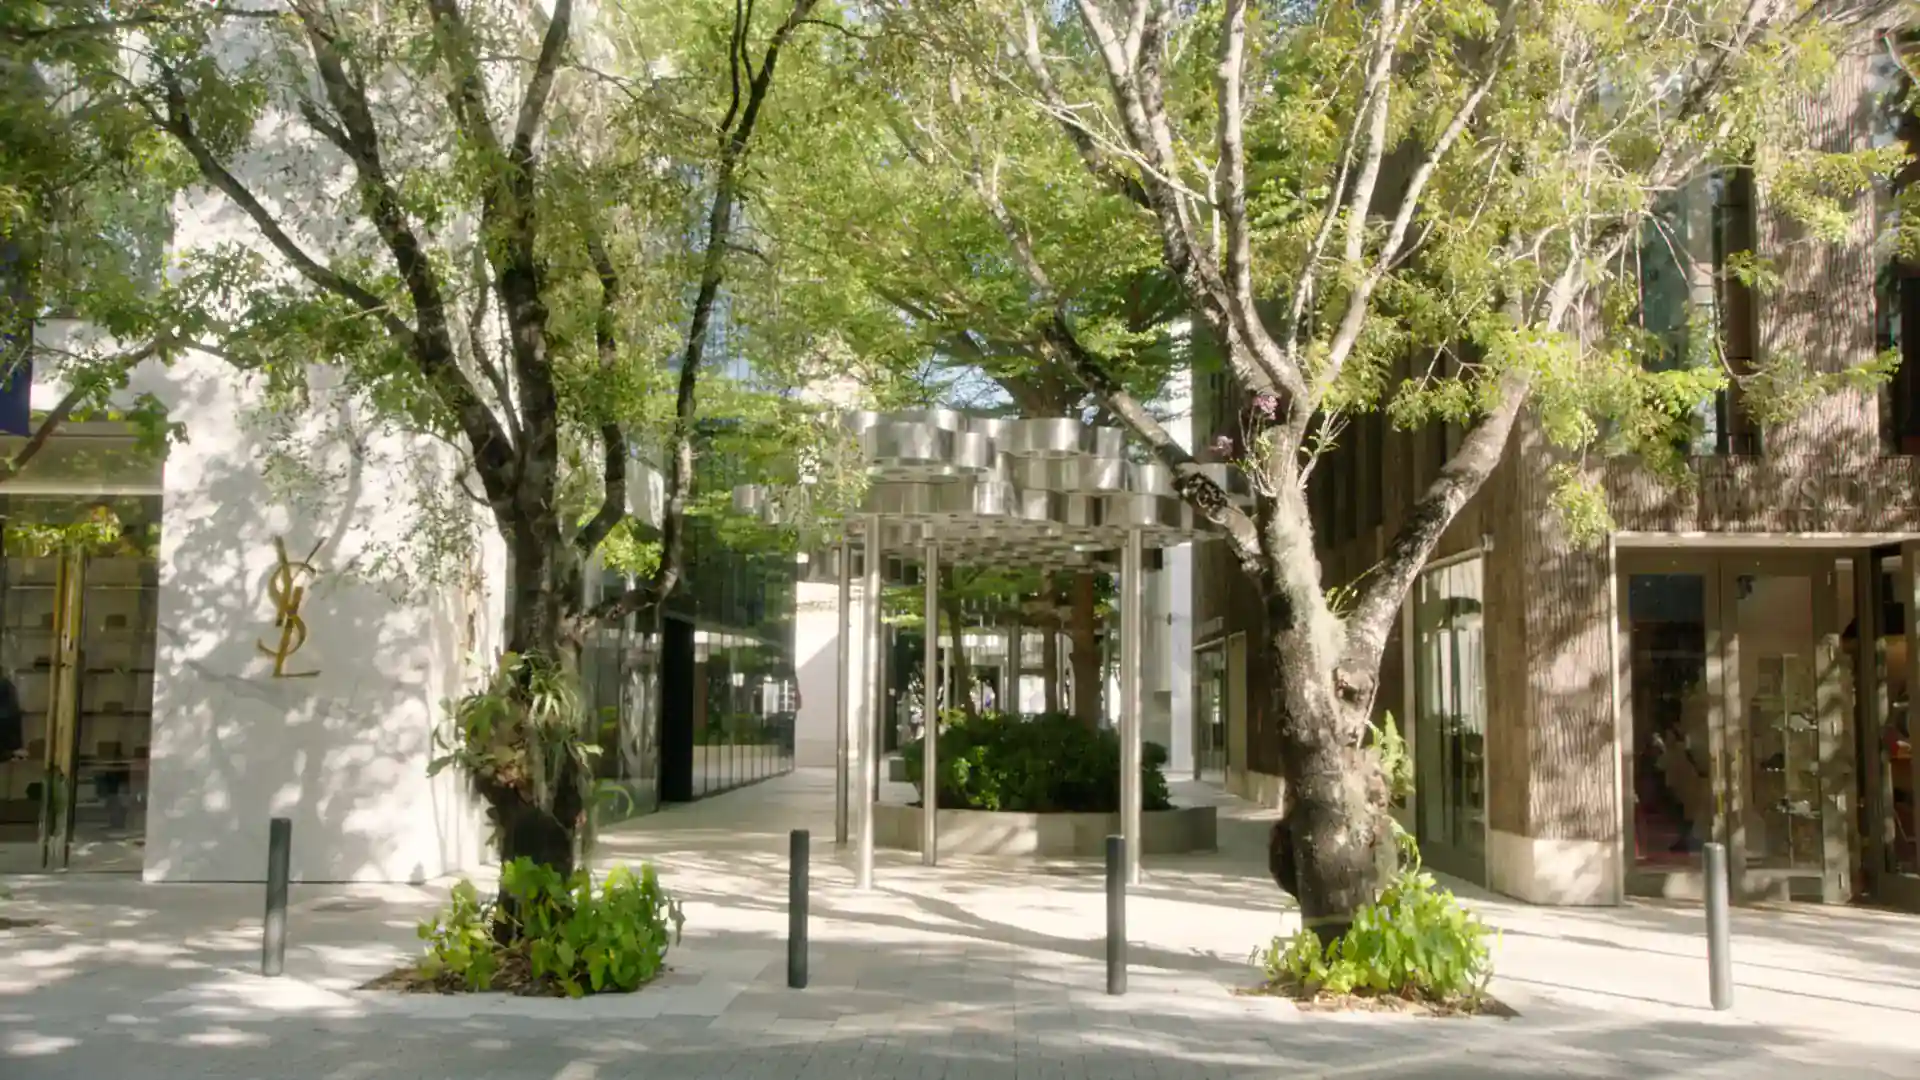 Entrance of the Hotel with two beautiful trees on the street